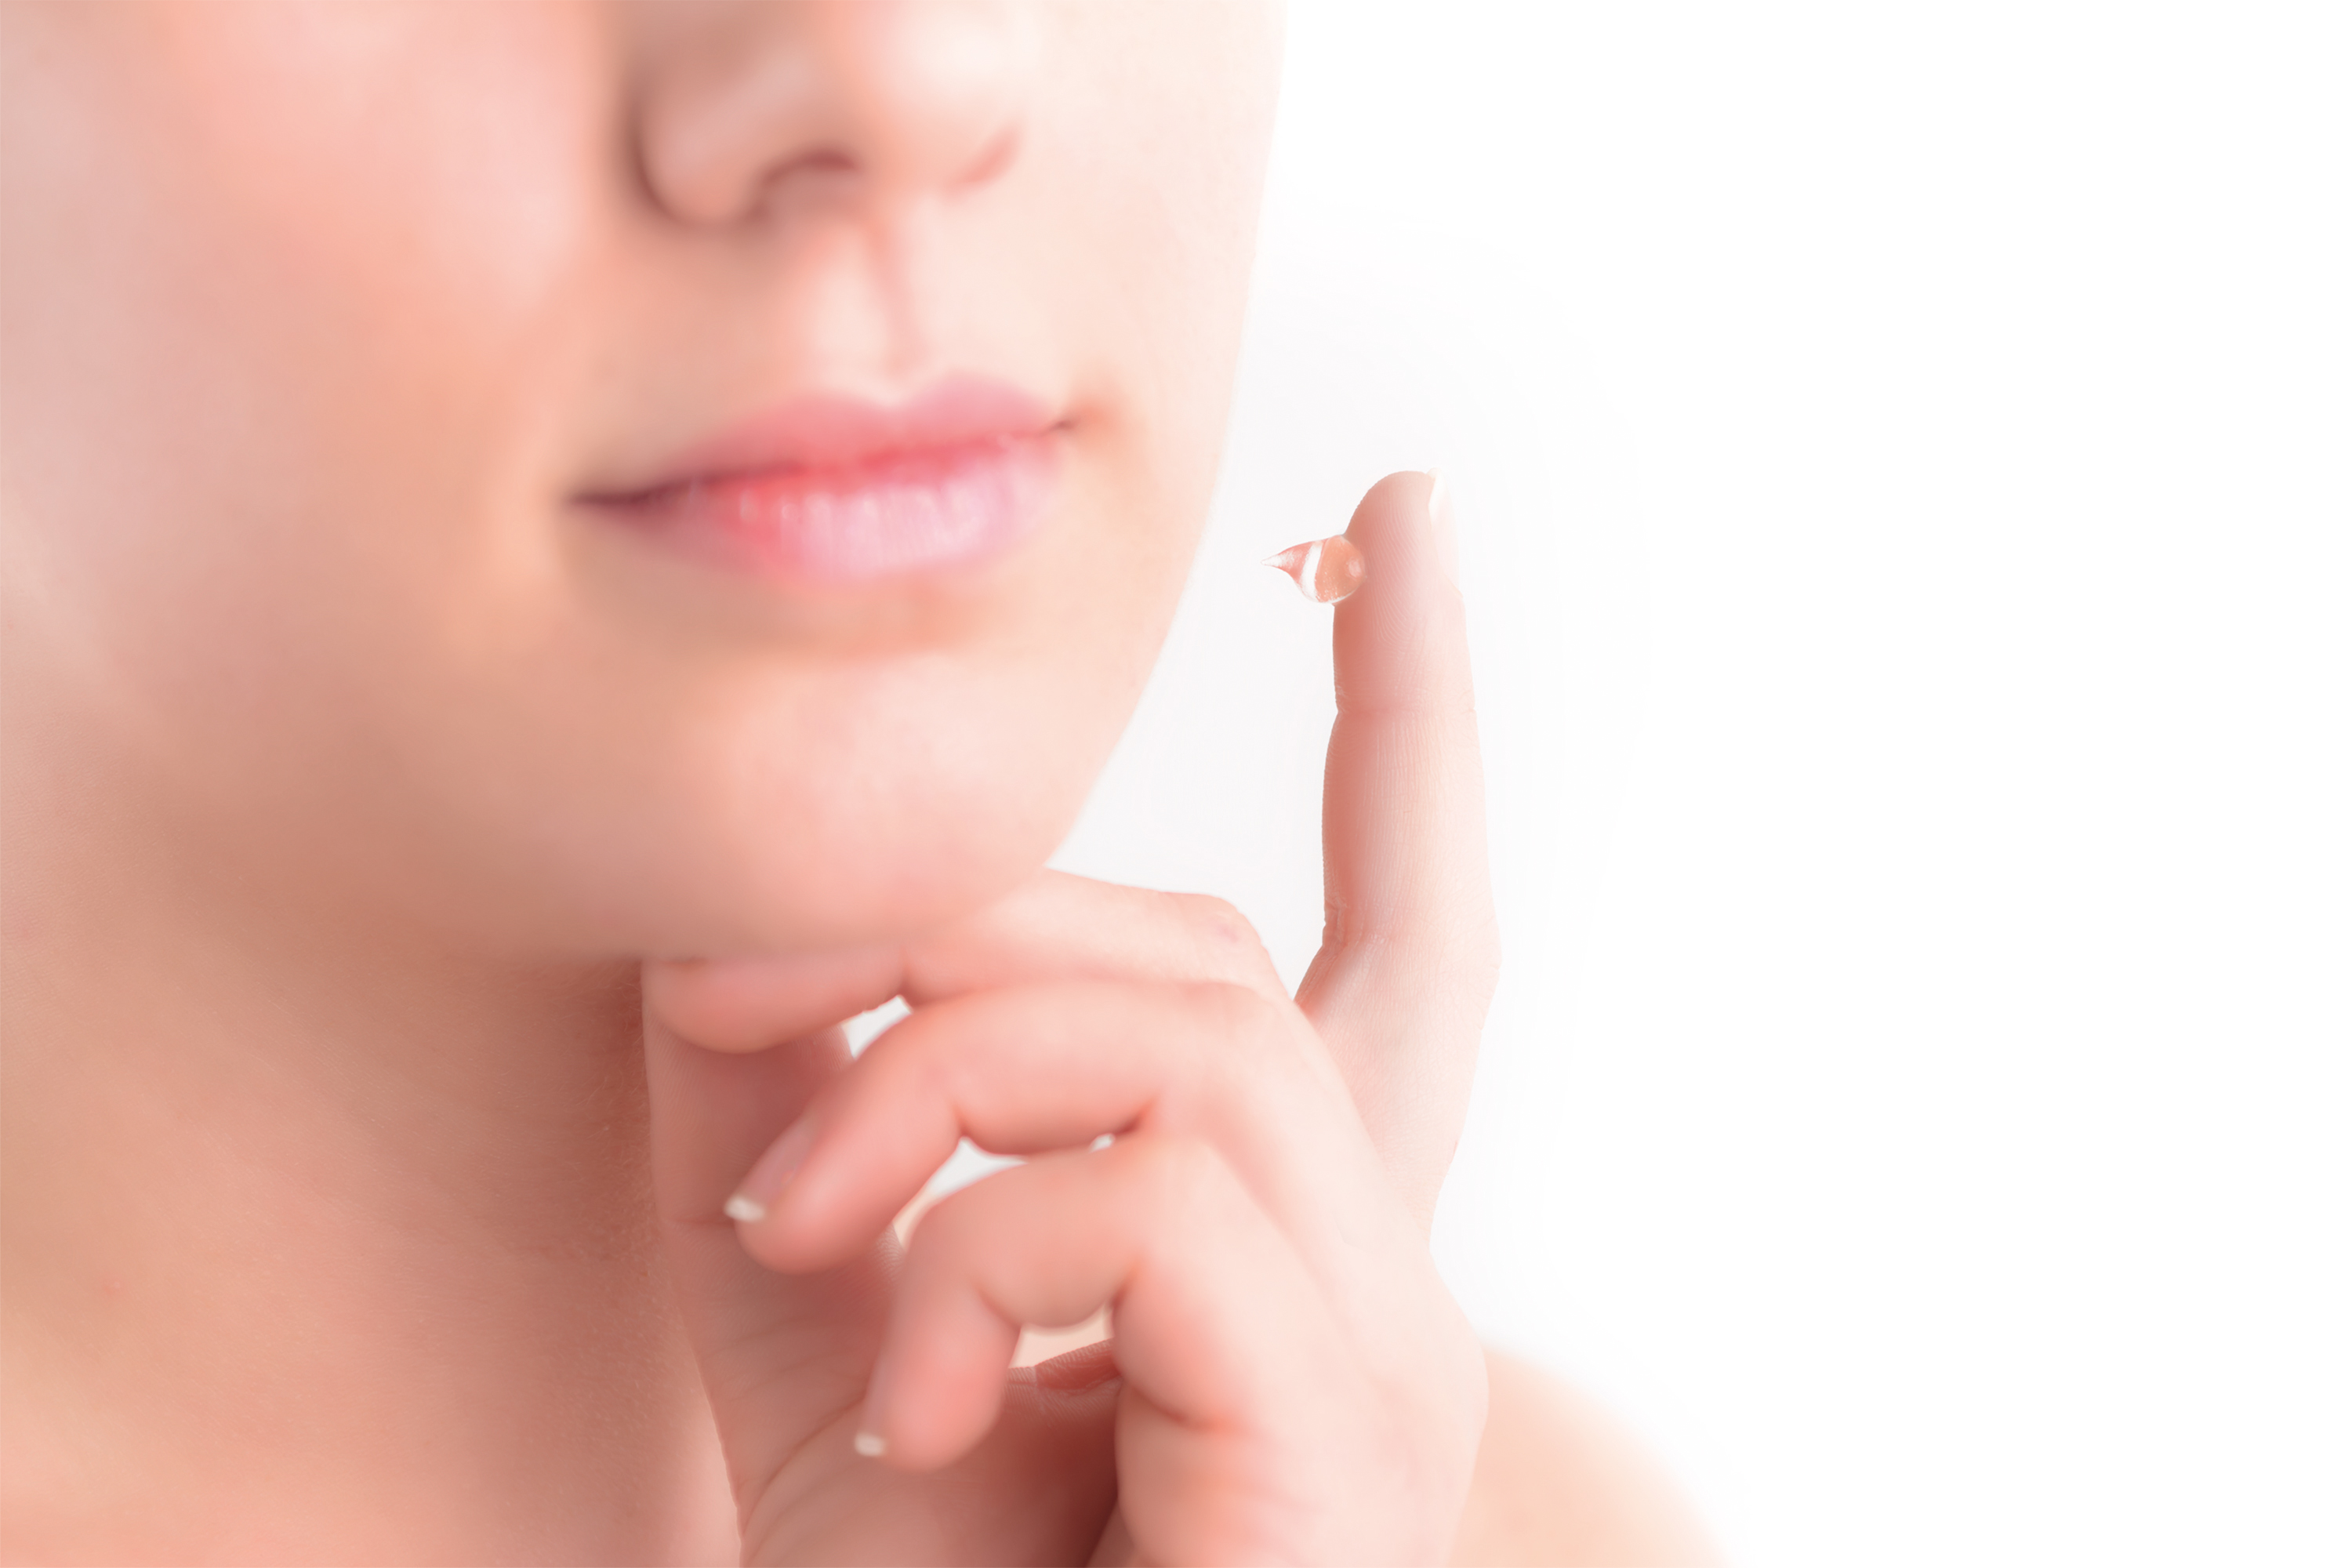 How to treat or remove facial scars